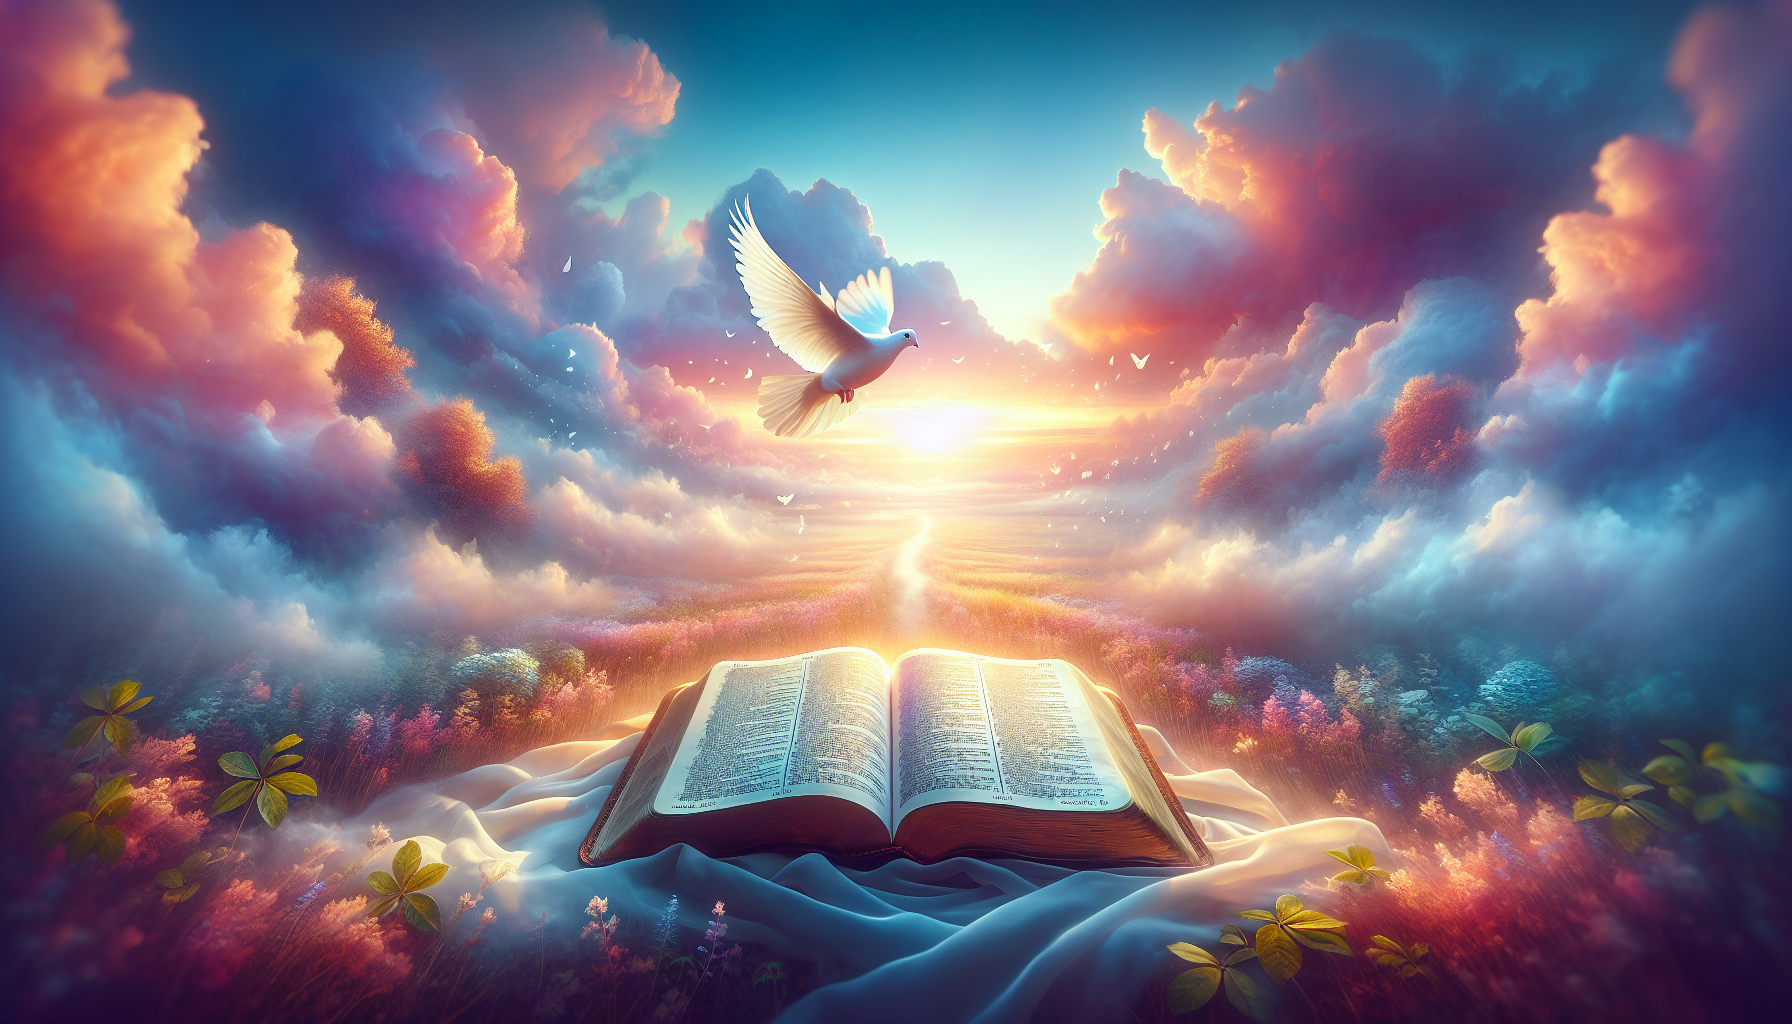 An ethereal, serene landscape at dawn with soft light breaking through gentle clouds, featuring an open Bible with Juan 14:27 highlighted. A peaceful dove flies overhead, representing tranquility and